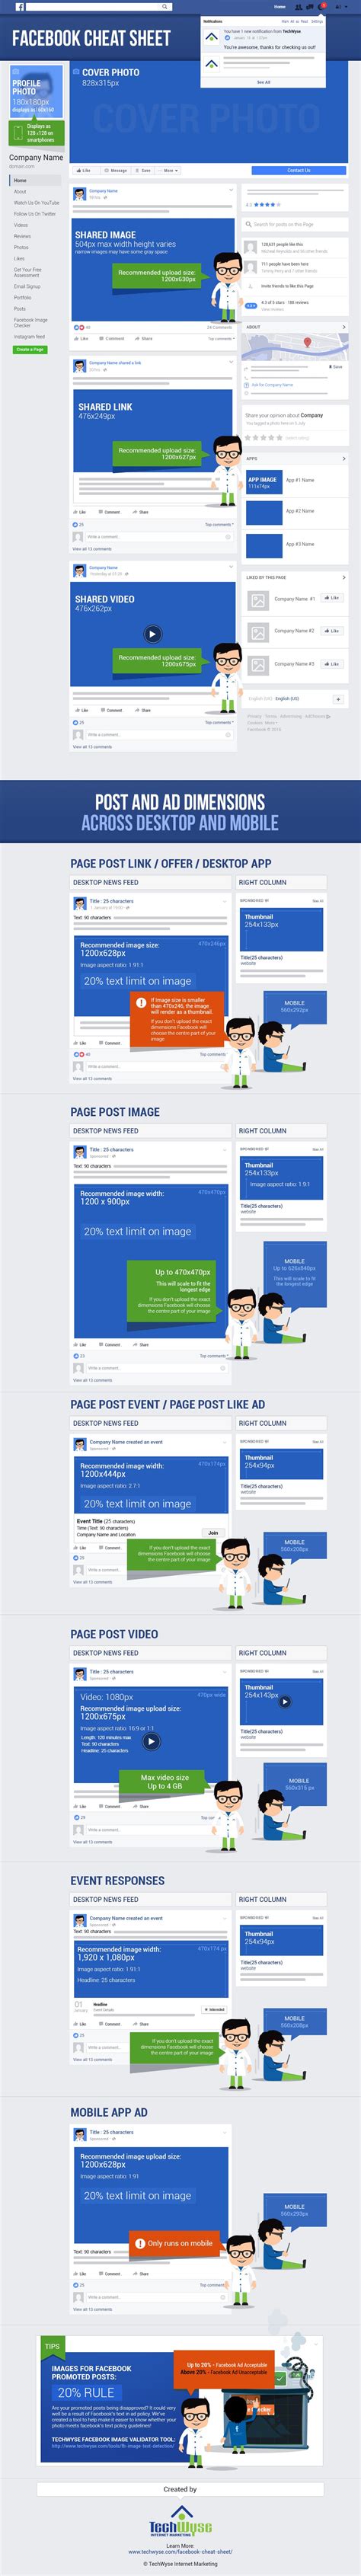 Facebook Cheat Sheet Sizes And Dimensions Fun Infographic Images